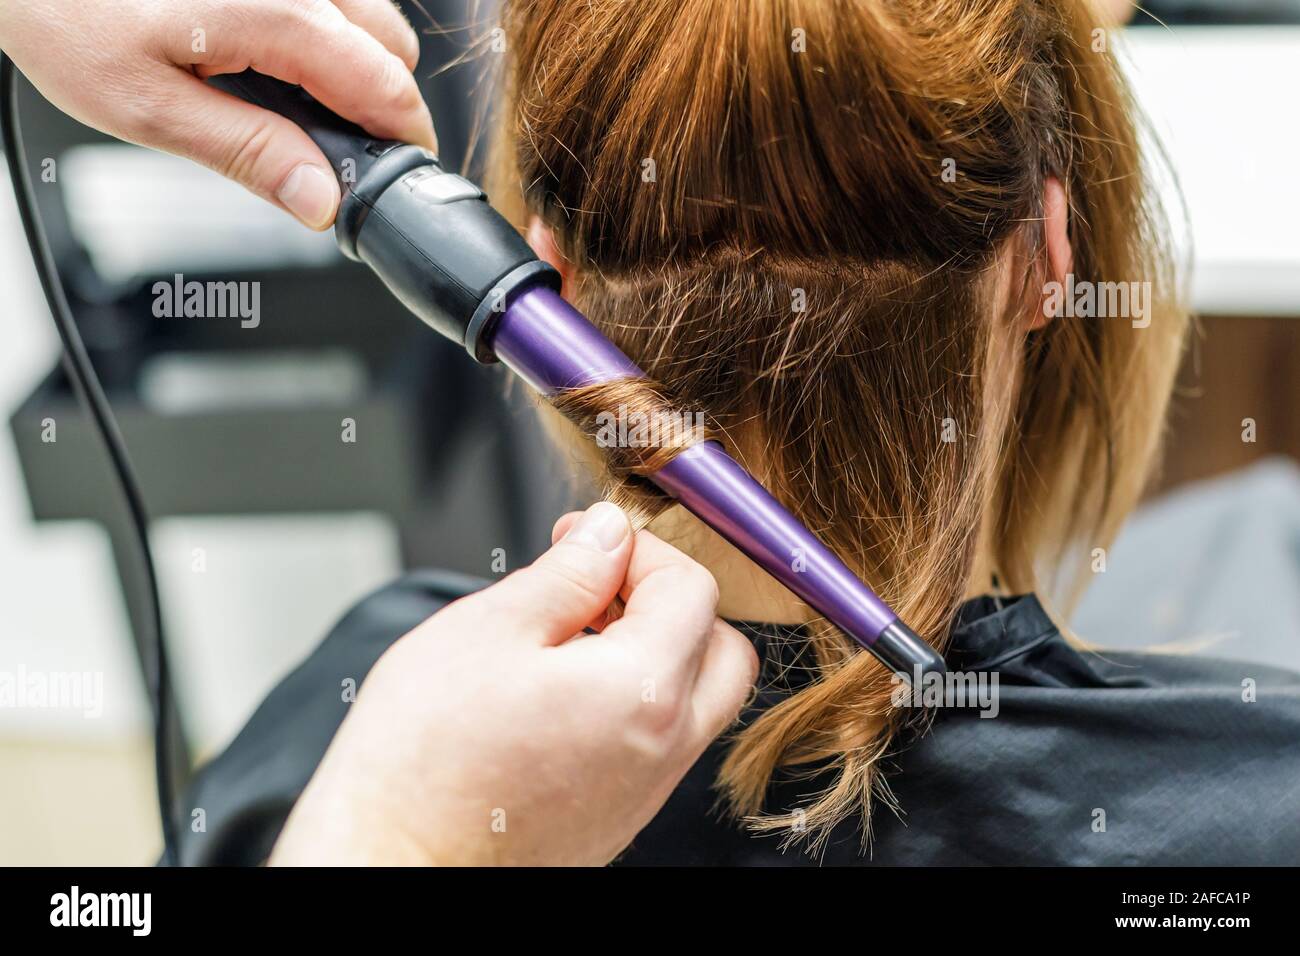 Hair Curler High Resolution Stock Photography and Images - Alamy